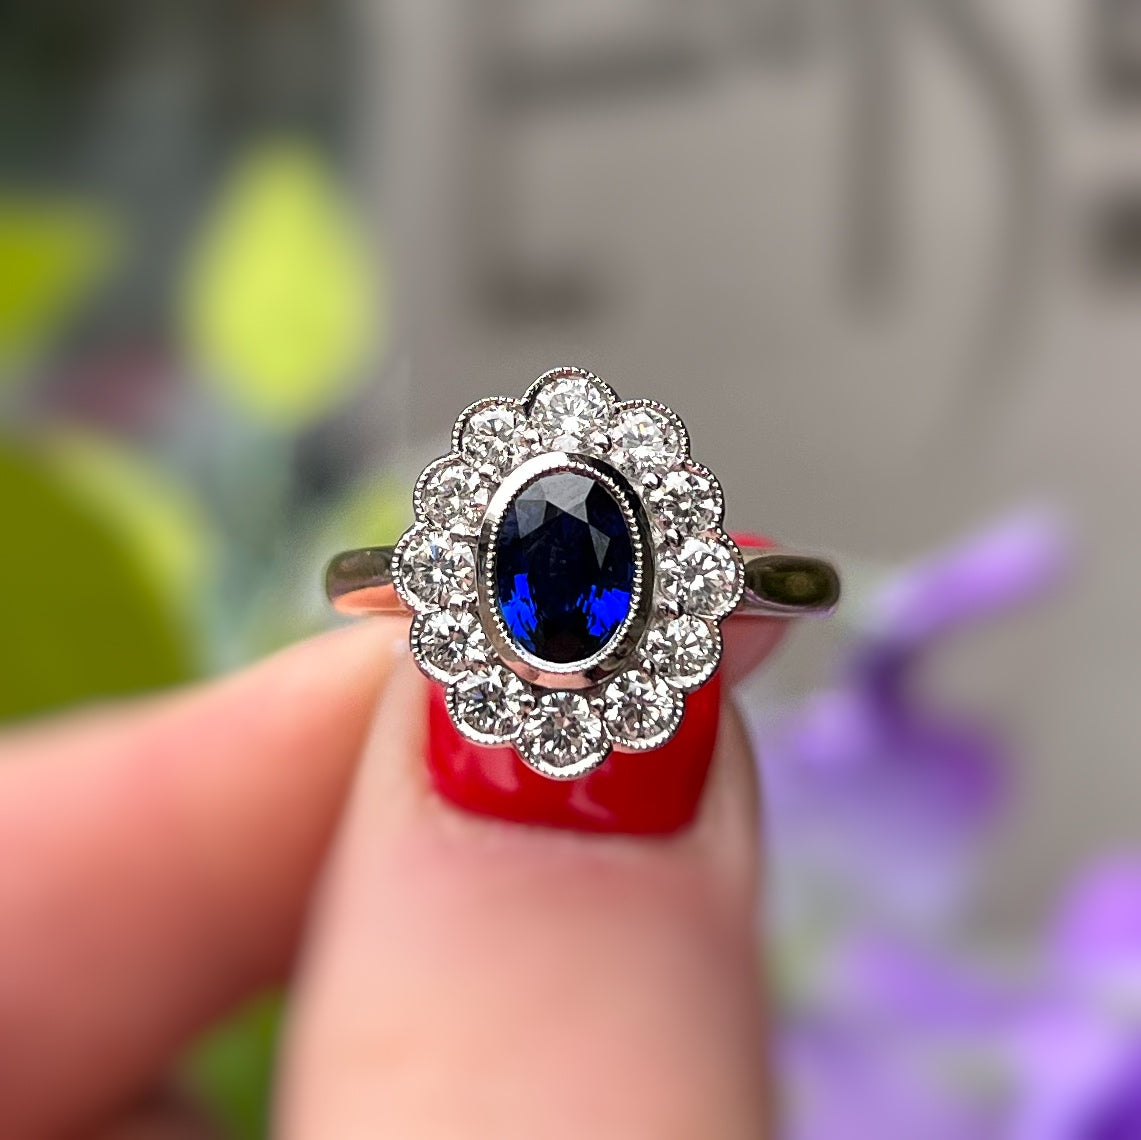 18ct Yellow Gold Ceylon Sapphire and Diamond Cluster Ring - Size M 1/2